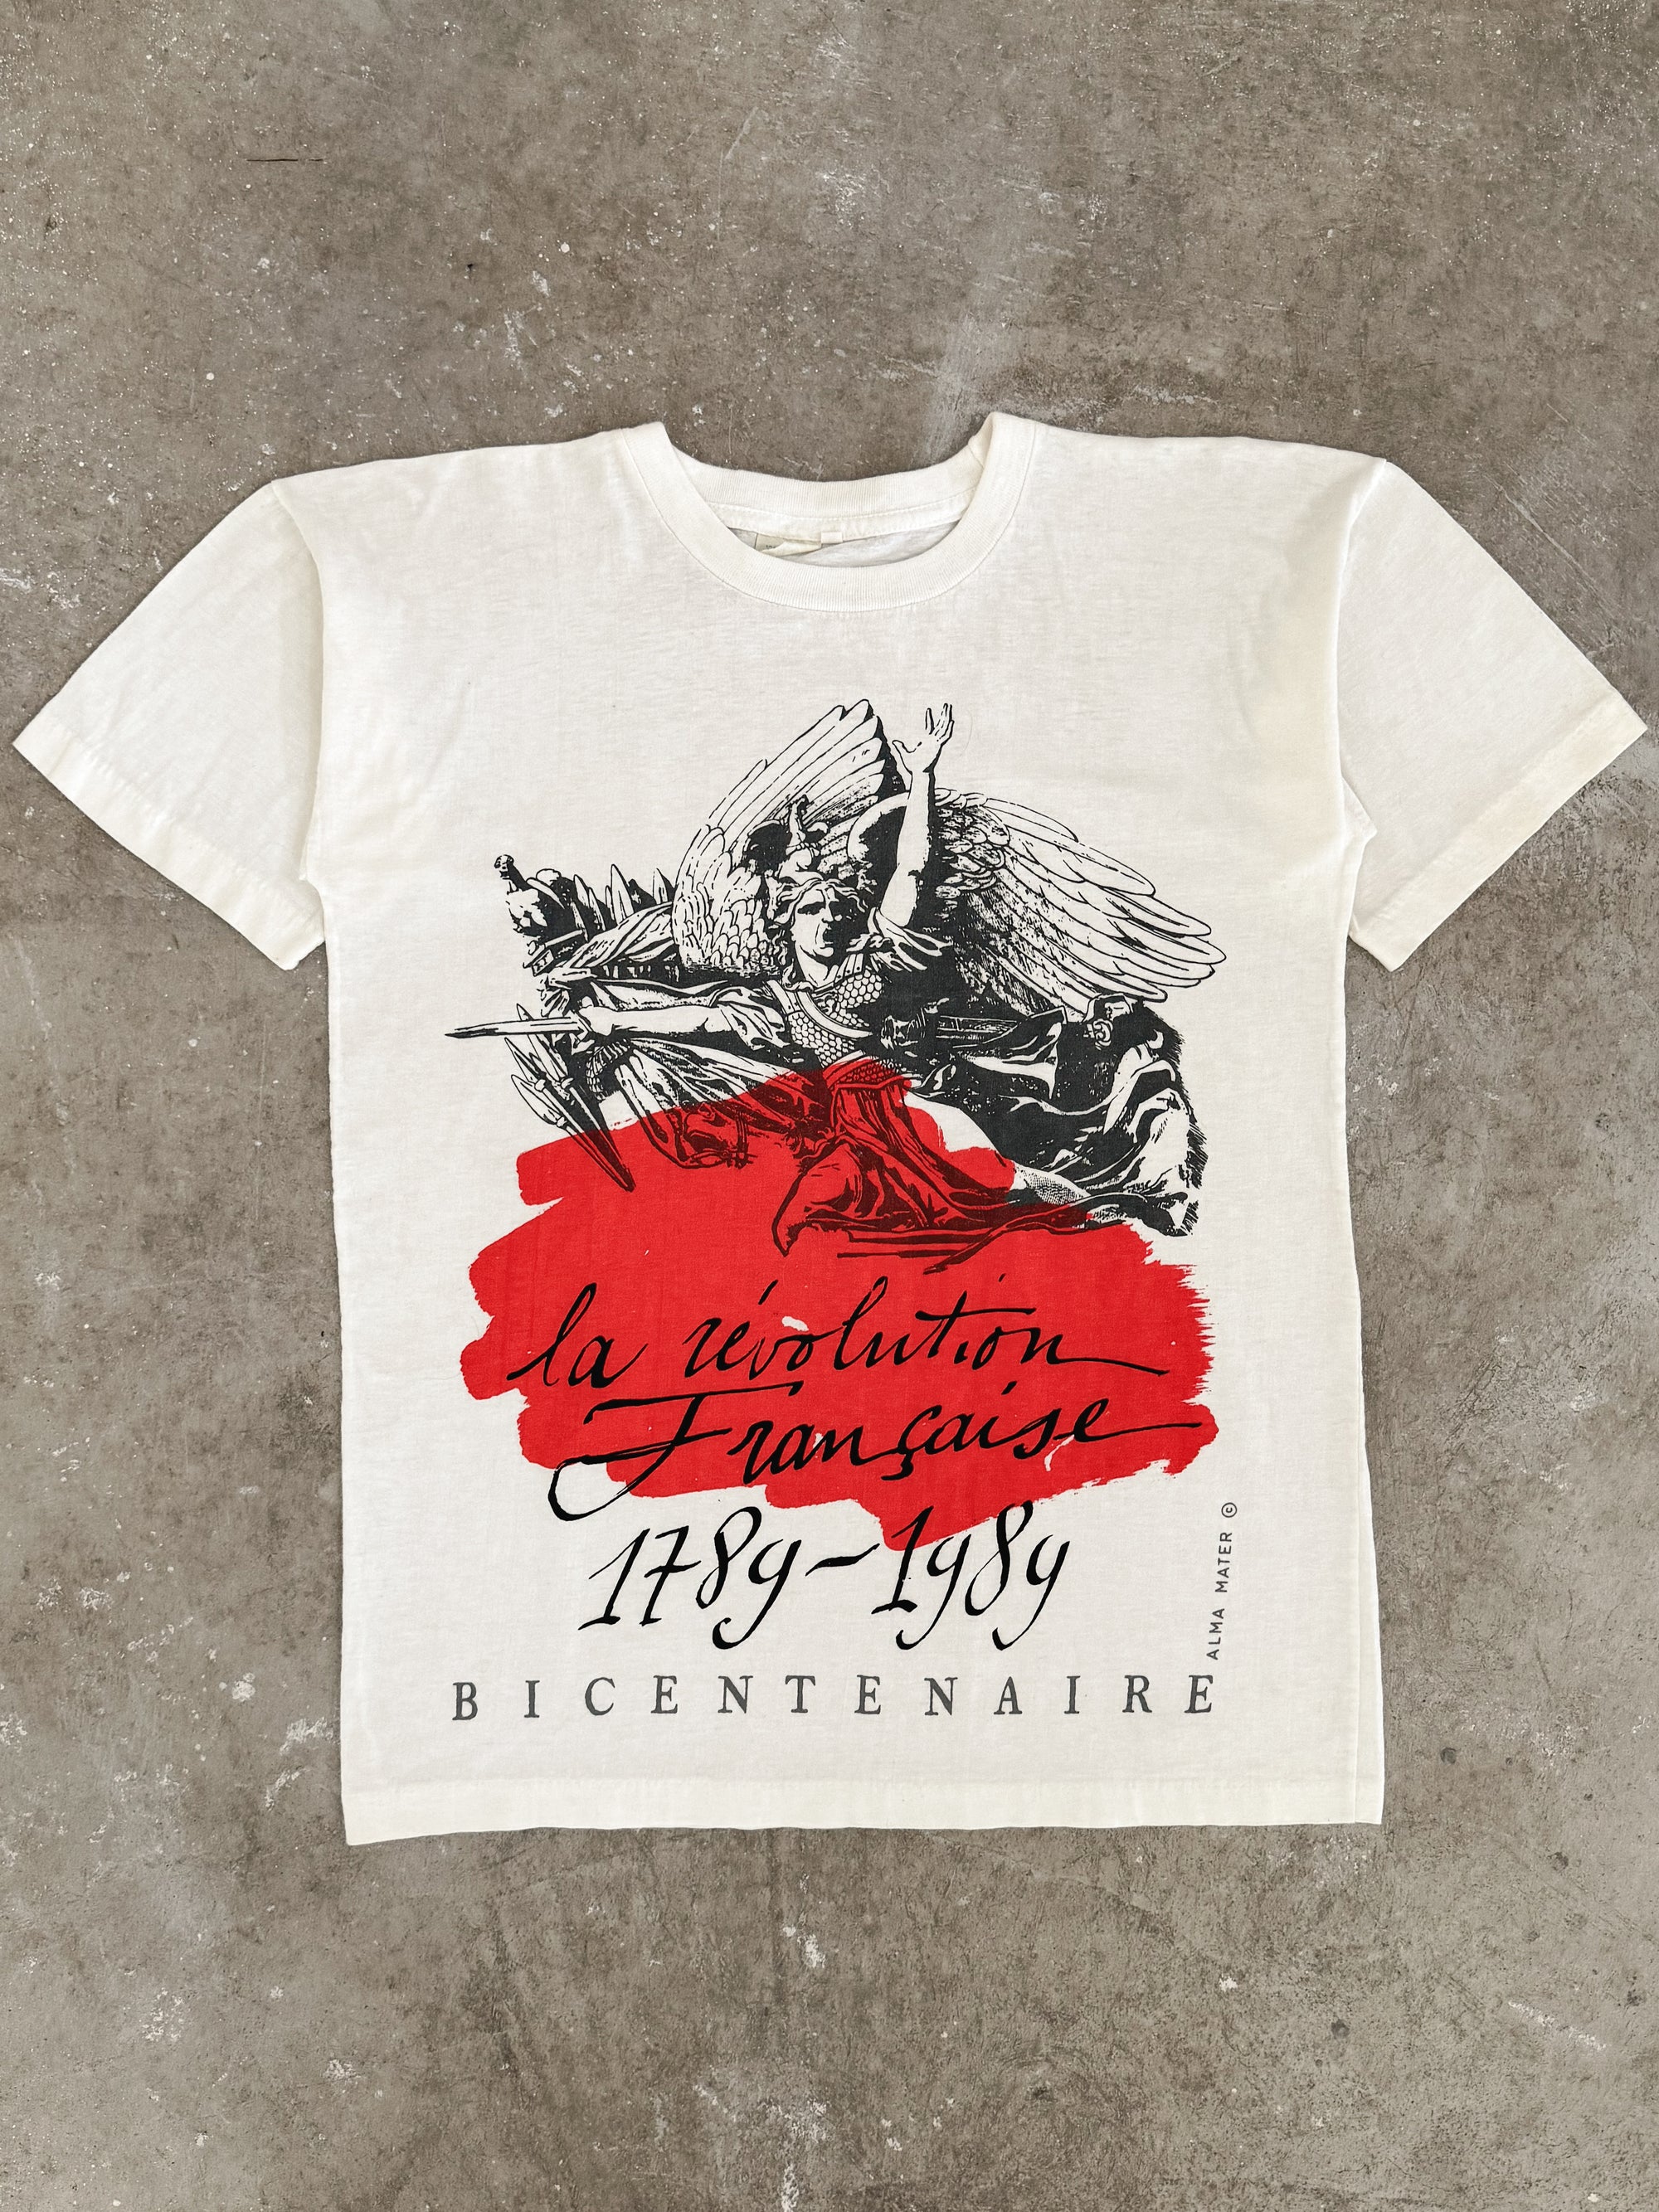 1980s "French Revolution" Tee (M)